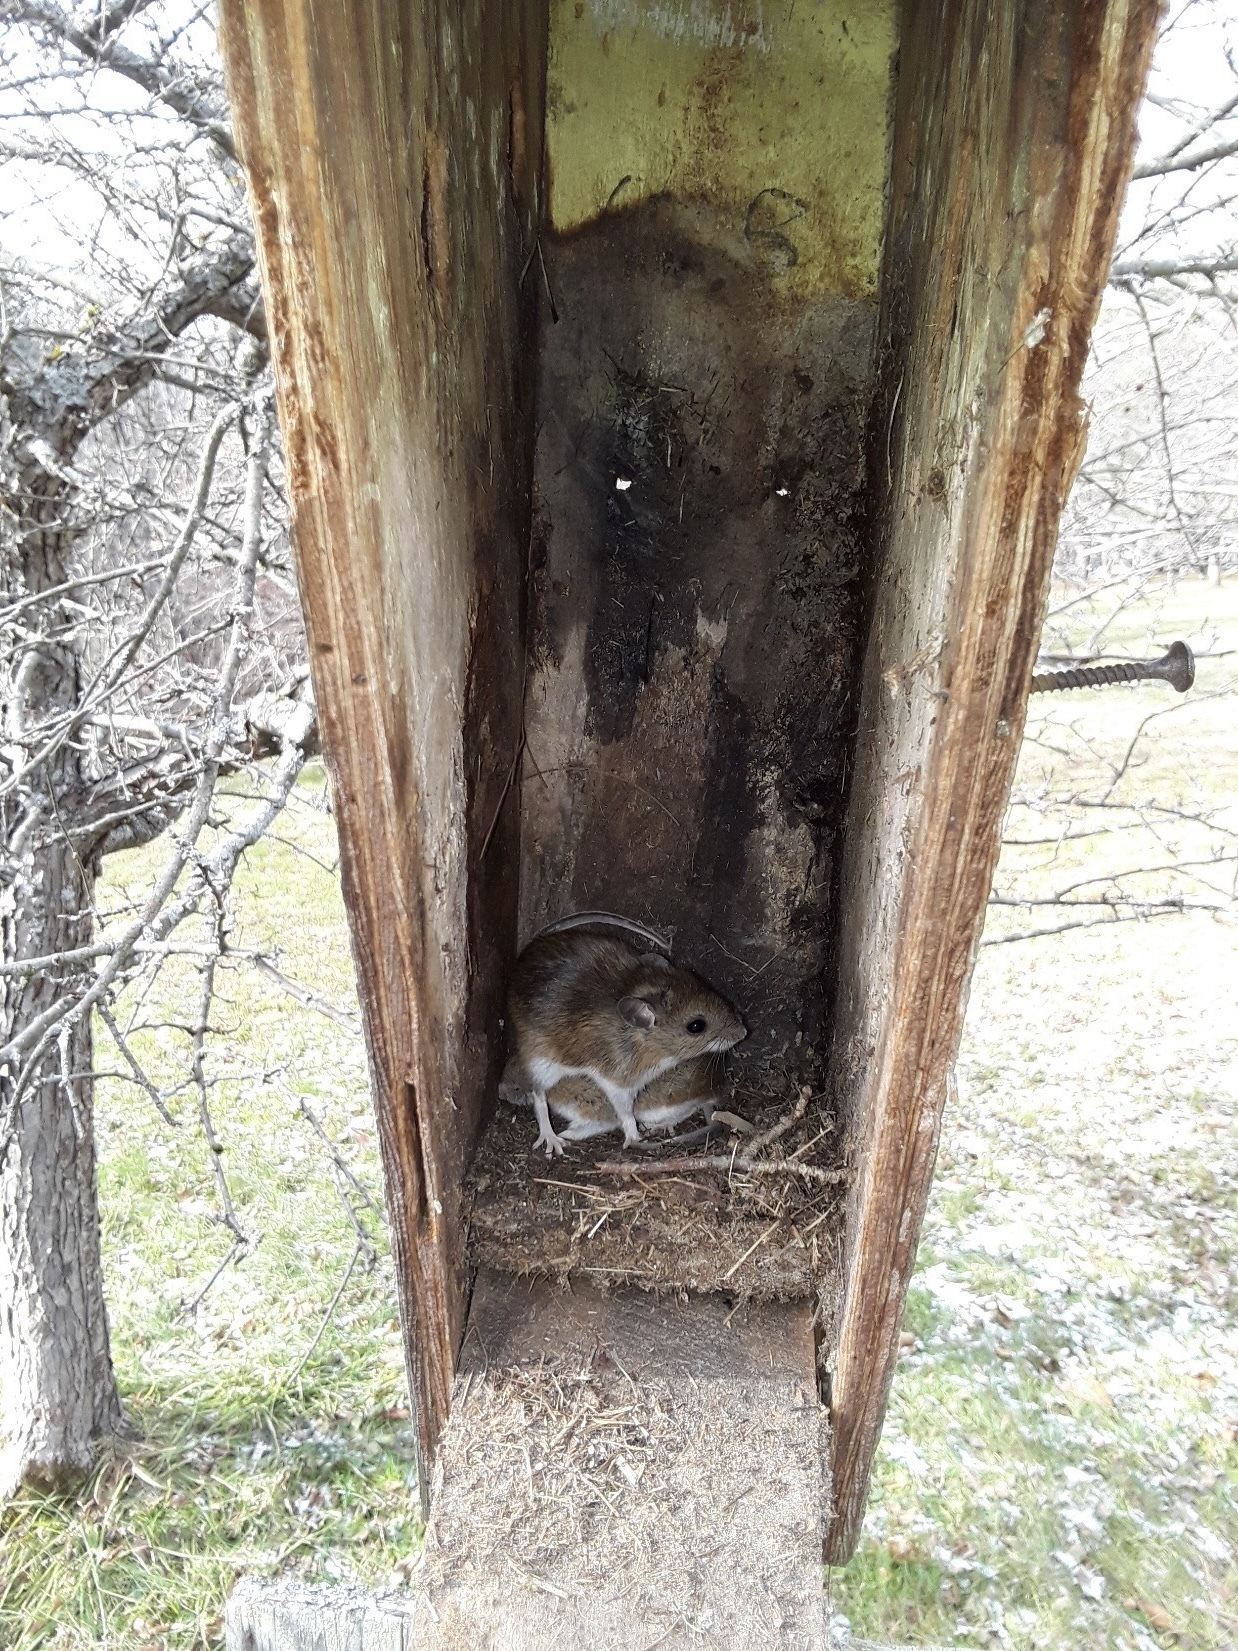 Evicting mice from a nest box